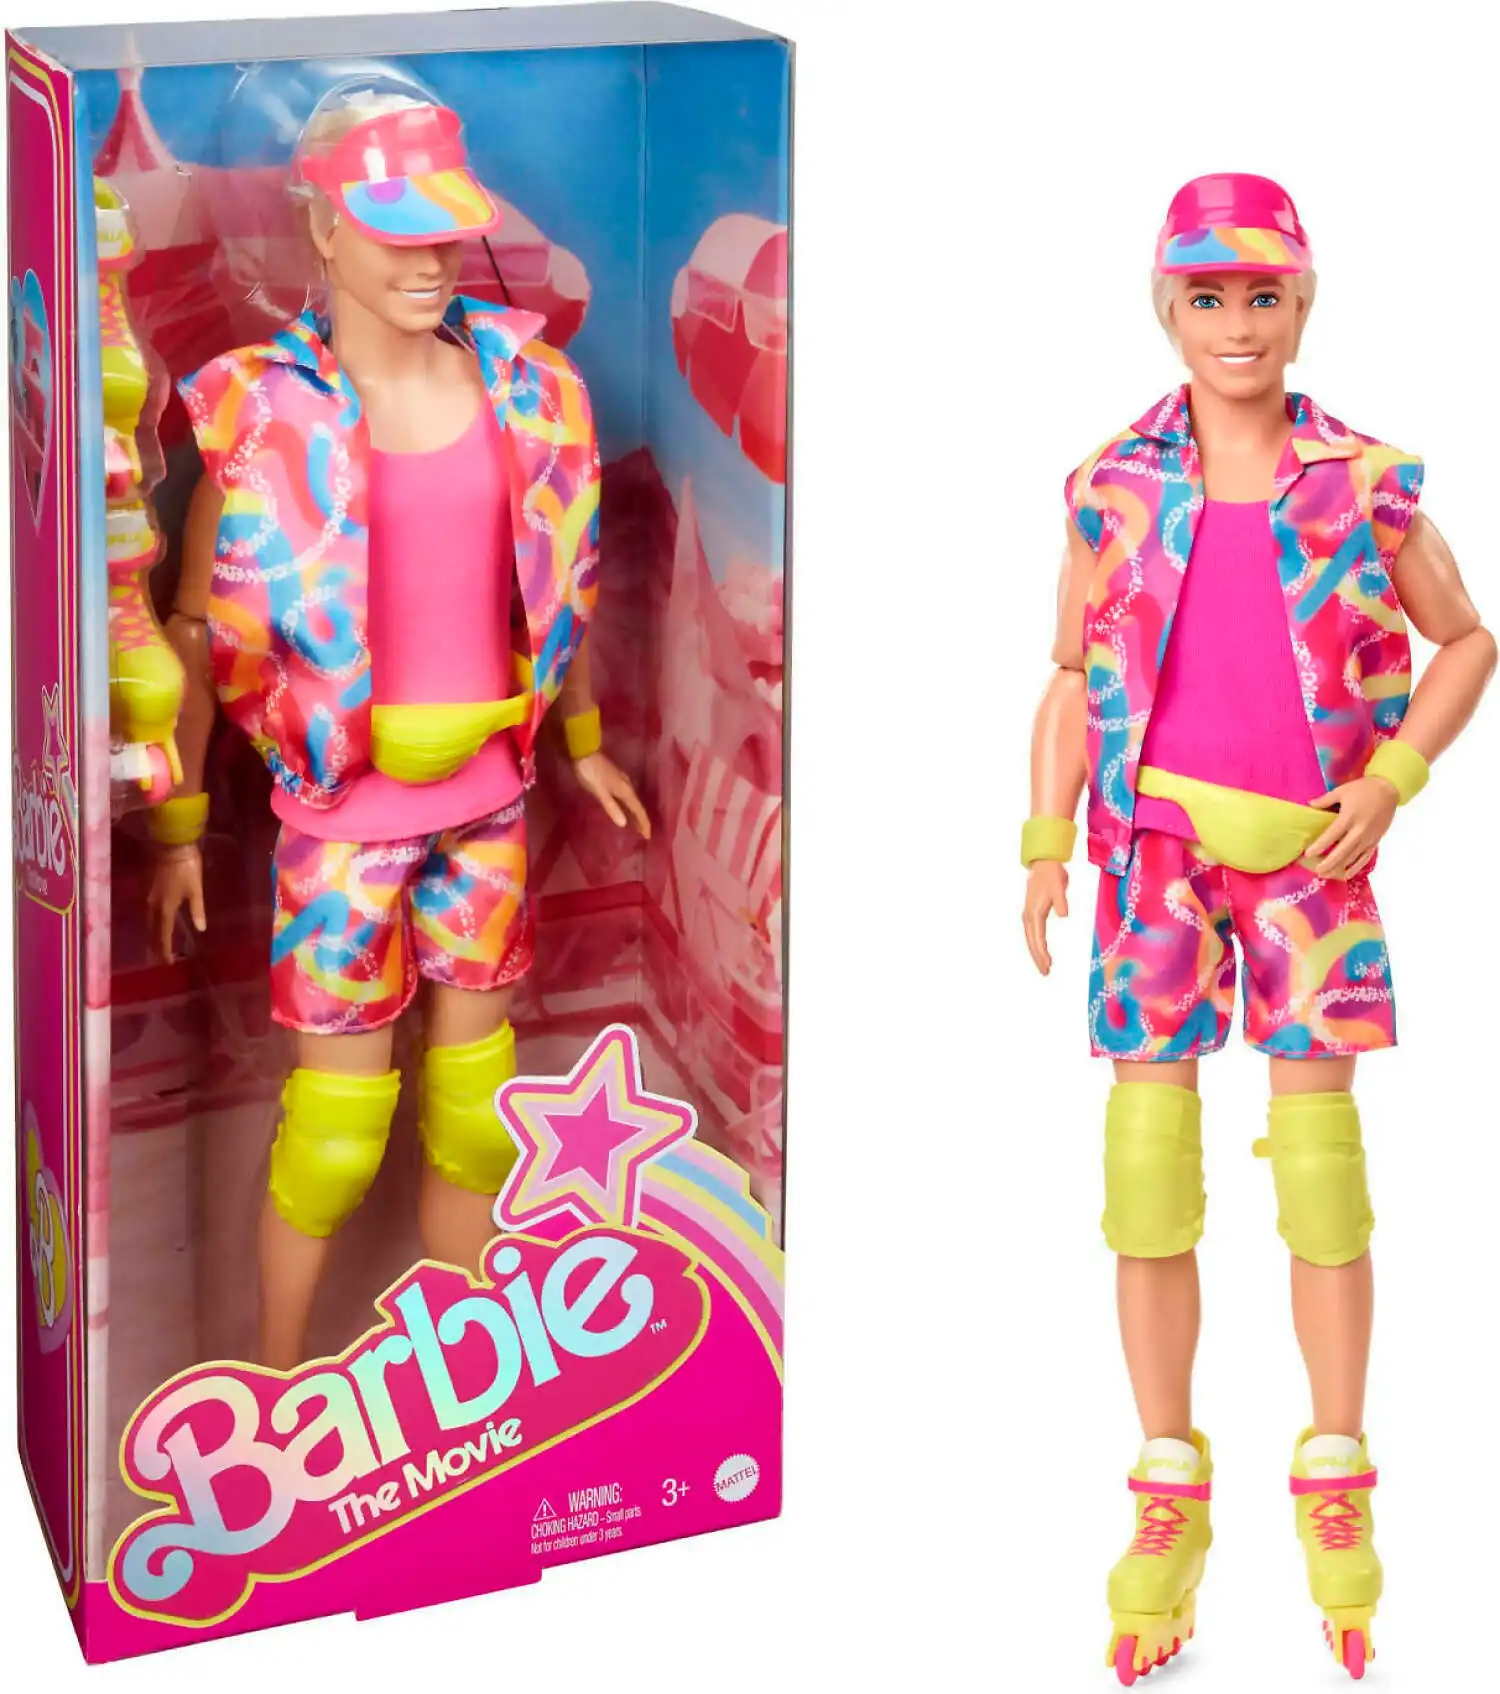 Barbie - The Movie Collectible Ken Doll In Inline Skating Outfit - Mattel